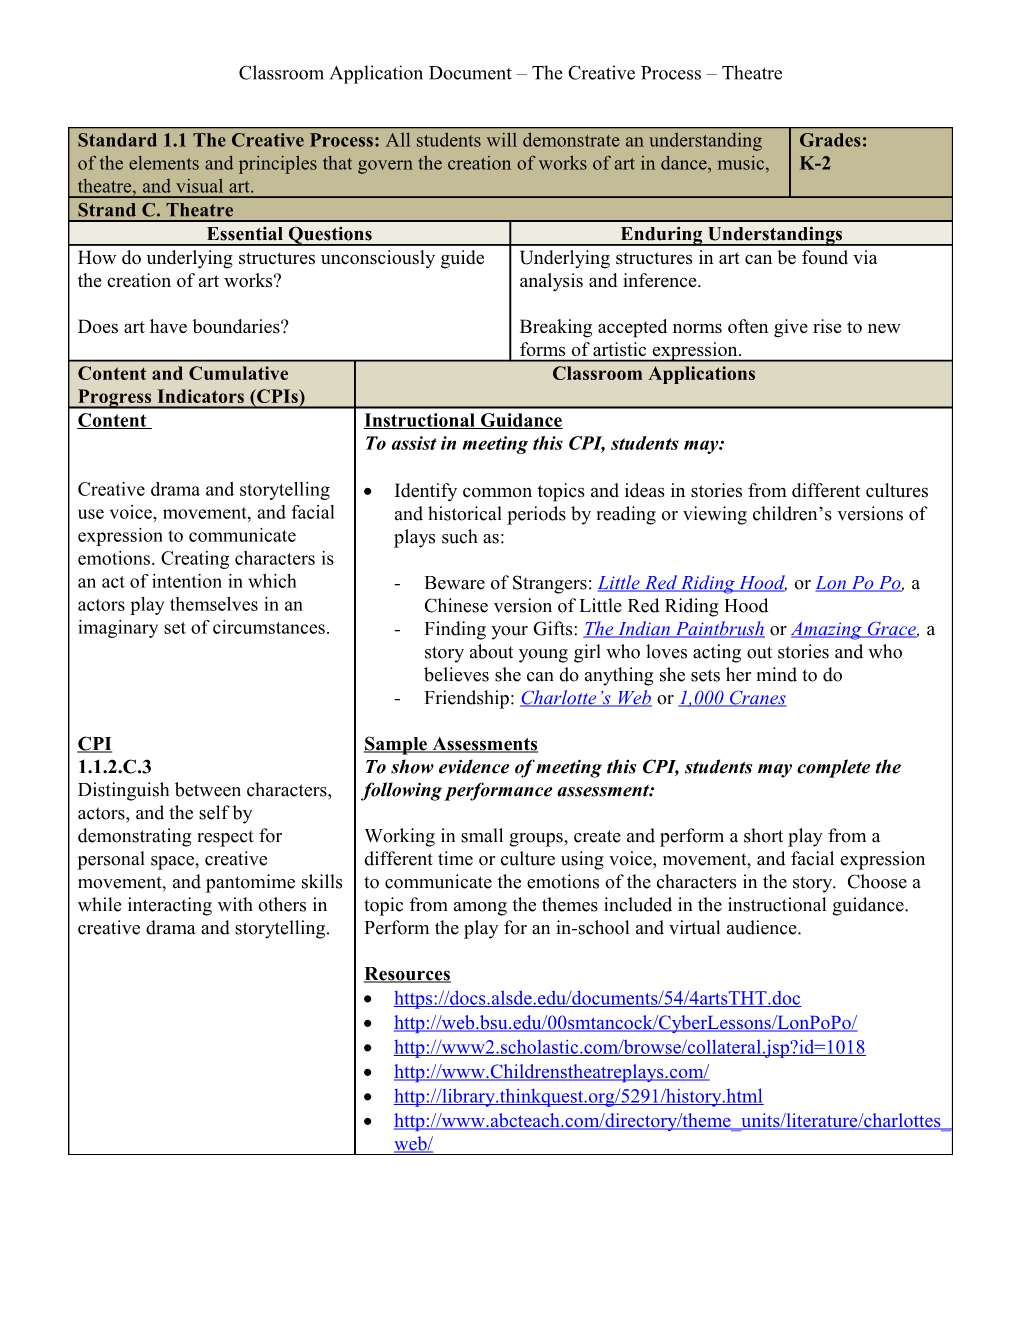 Classroom Application Document the Creative Process Theatre